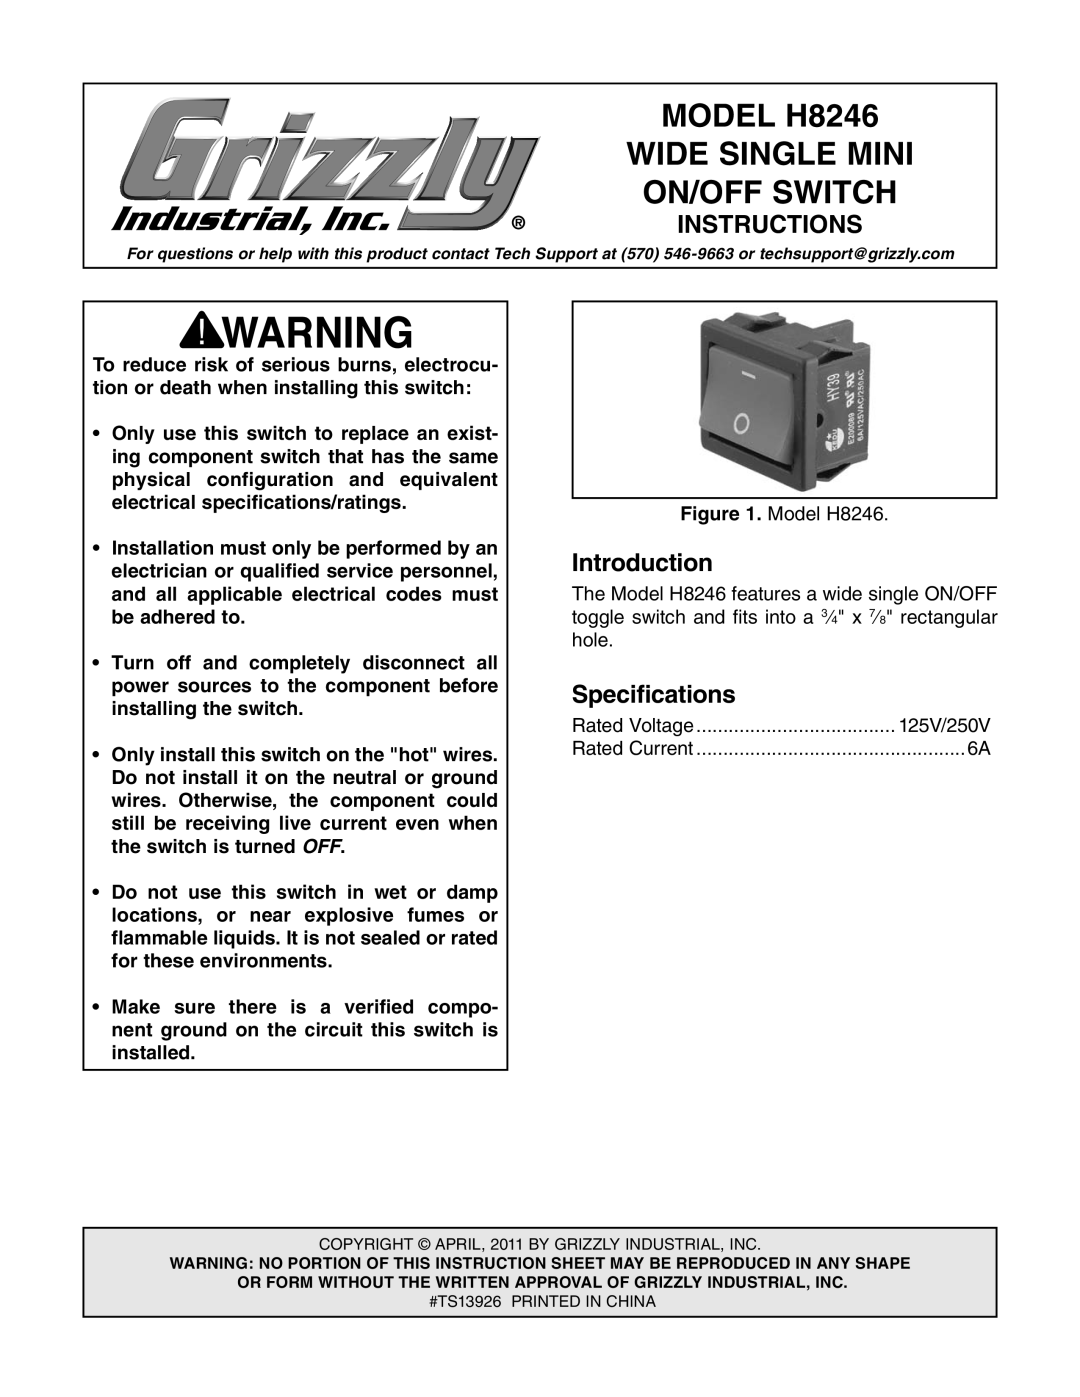 Grizzly specifications Introduction, Specifications, MODEL H8246, On/Off Switch, Wide Single Mini, Instructions 